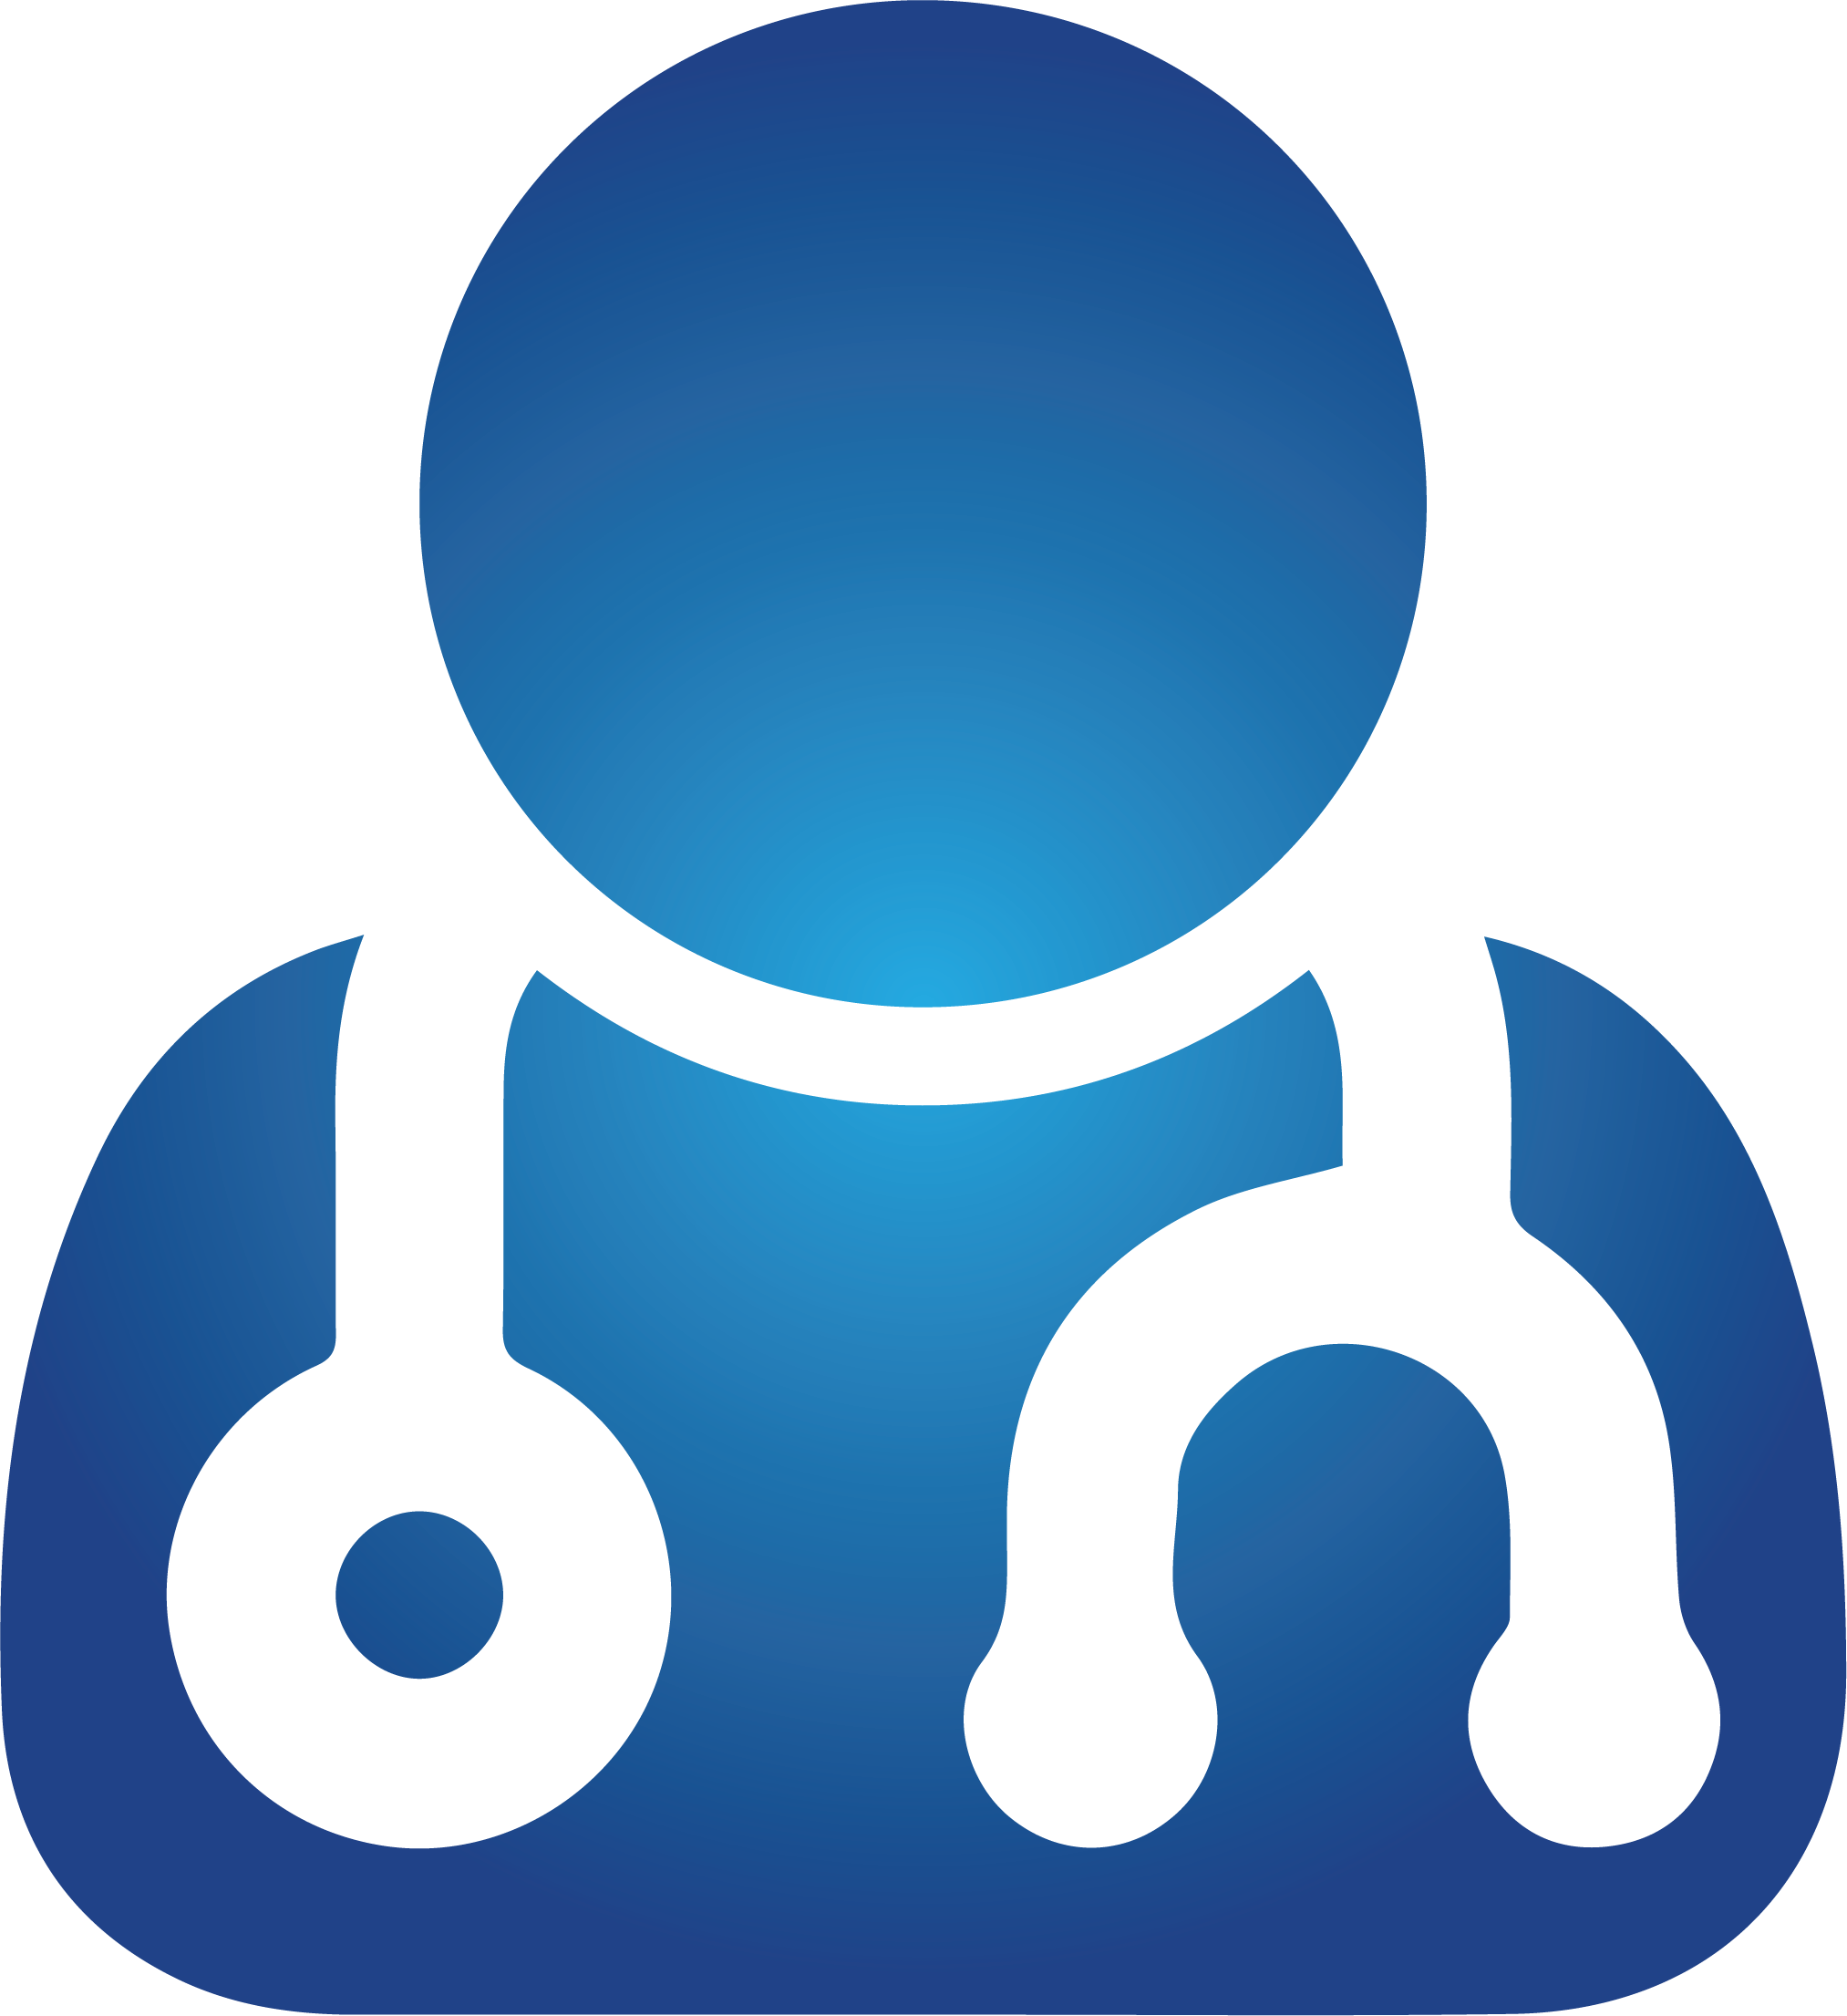 Icon of a person with a stethoscope around their neck.